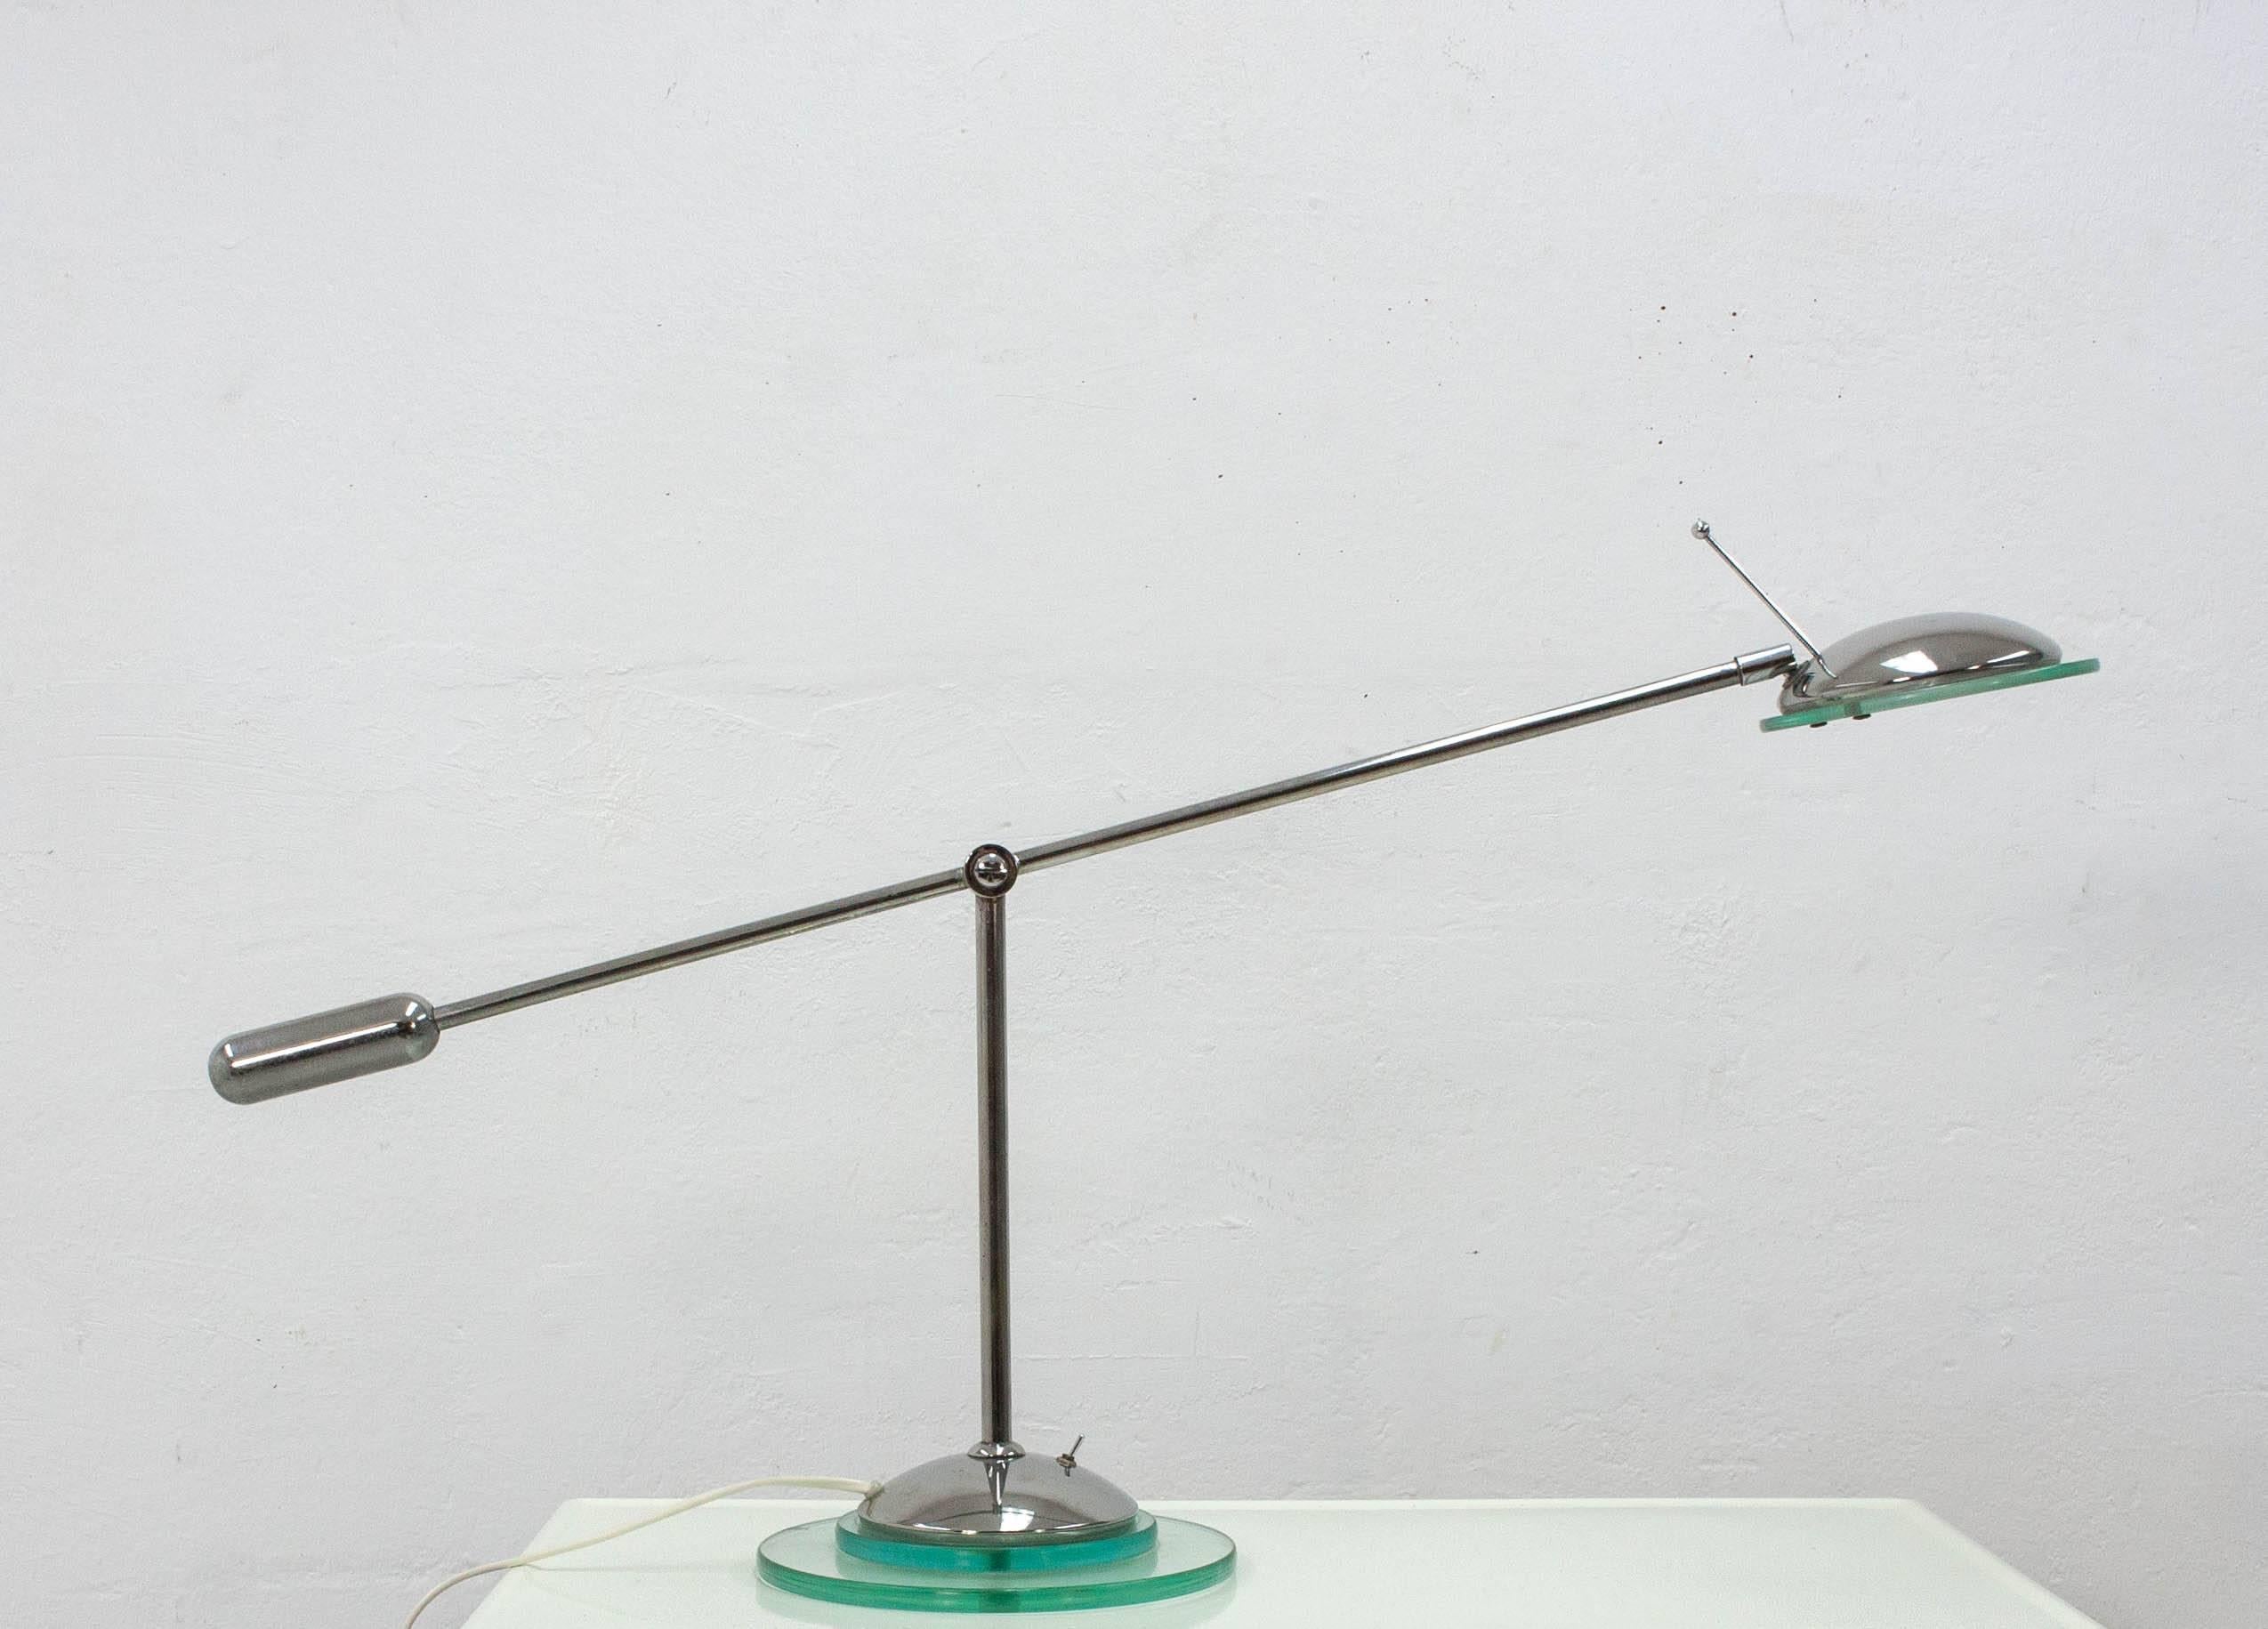 Very nice chrome counter balance desk light, Optelma Swiss. Chrome with thick
glass details. Good quality, two-way switch halogen, very good condition.